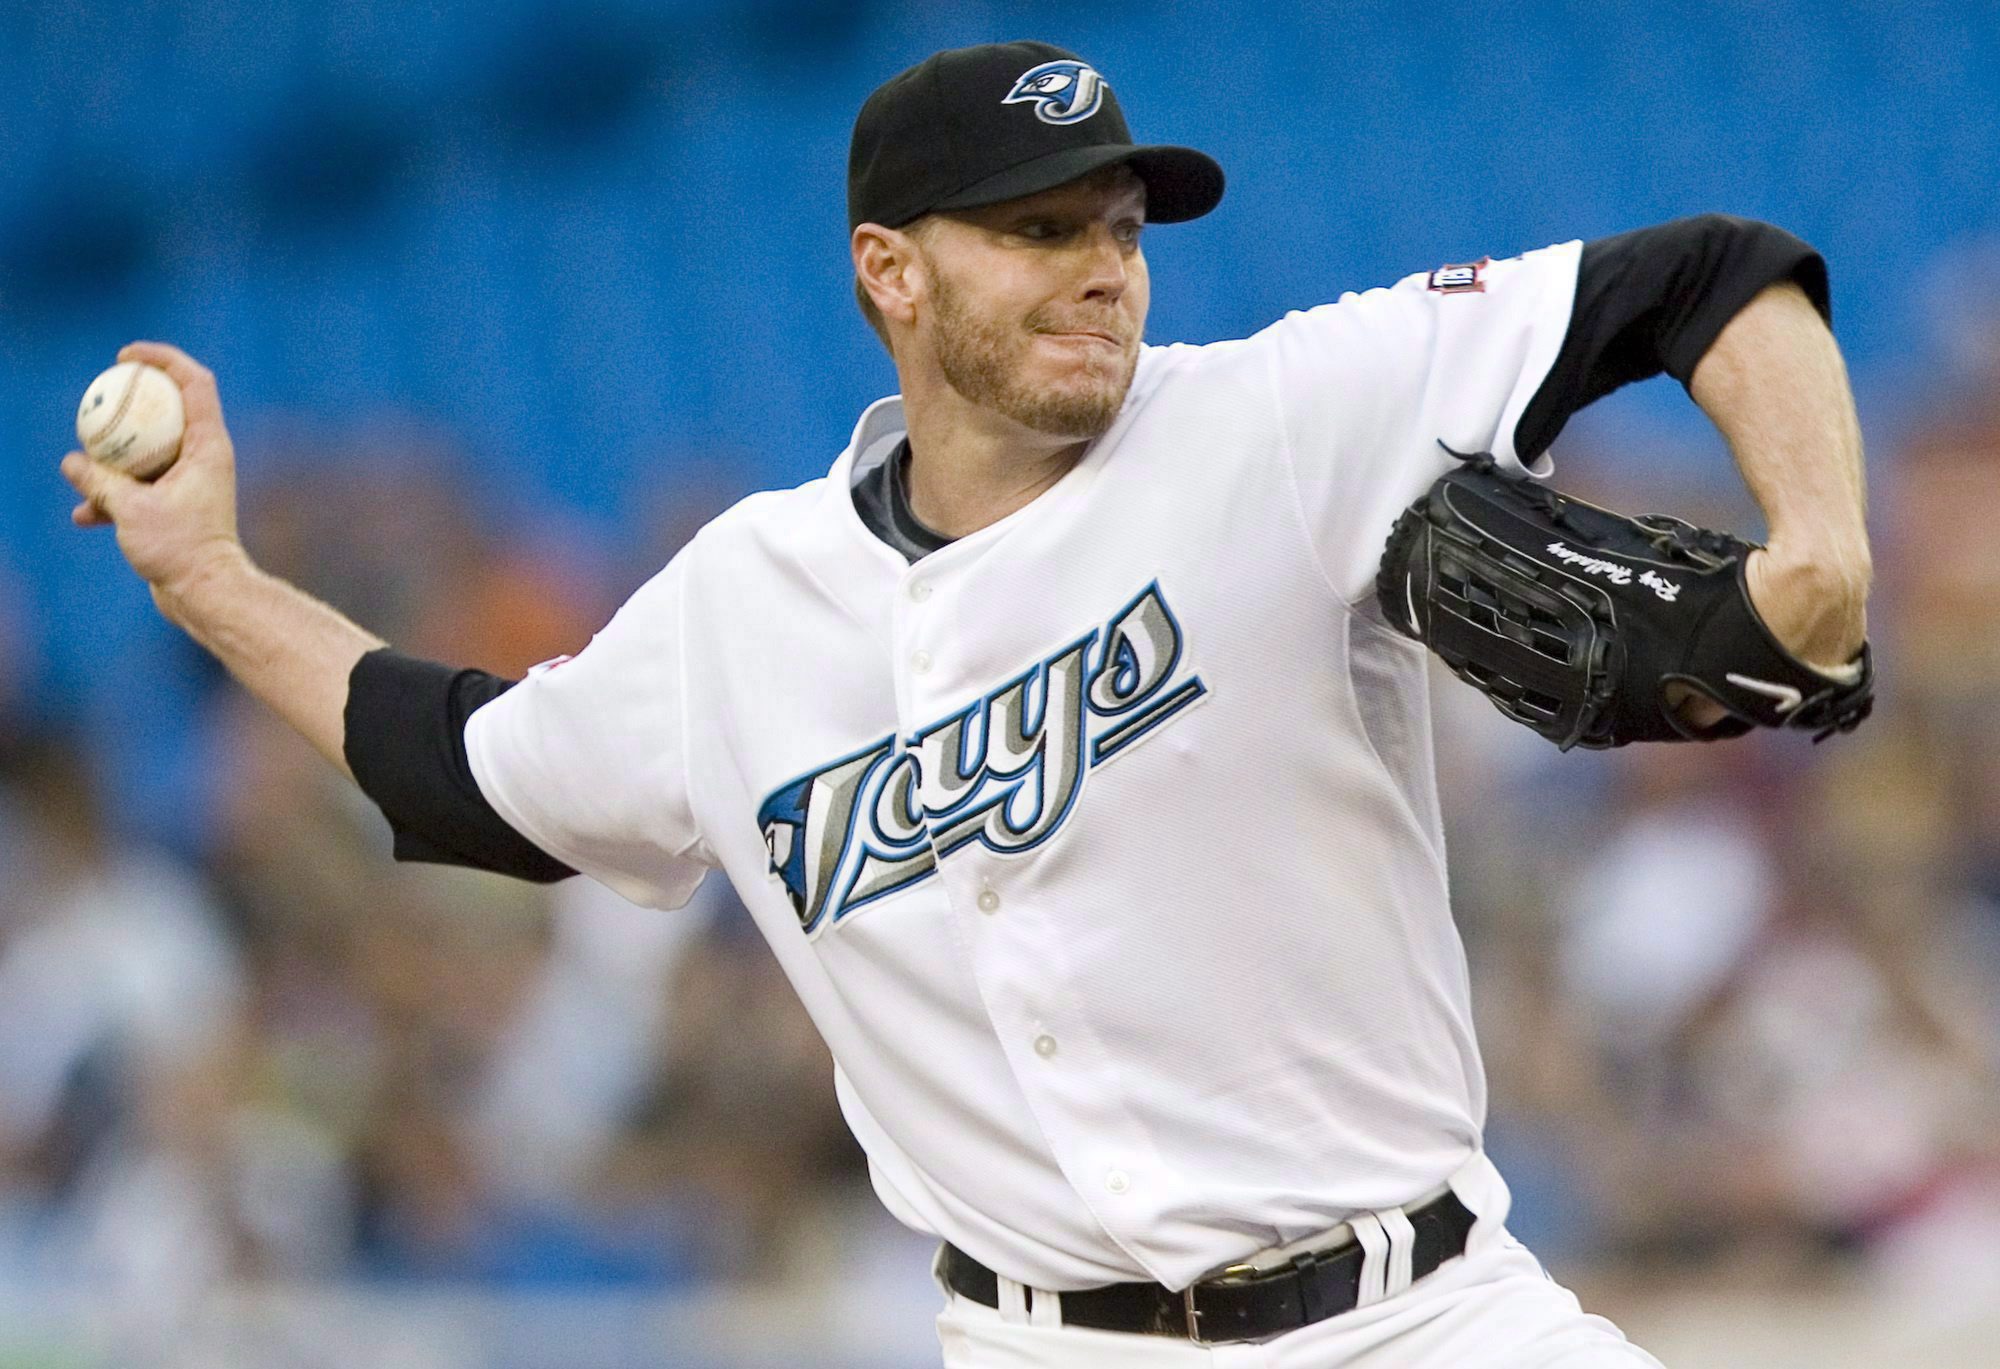 Blue Jays: Happy Birthday to the late, great Roy Halladay